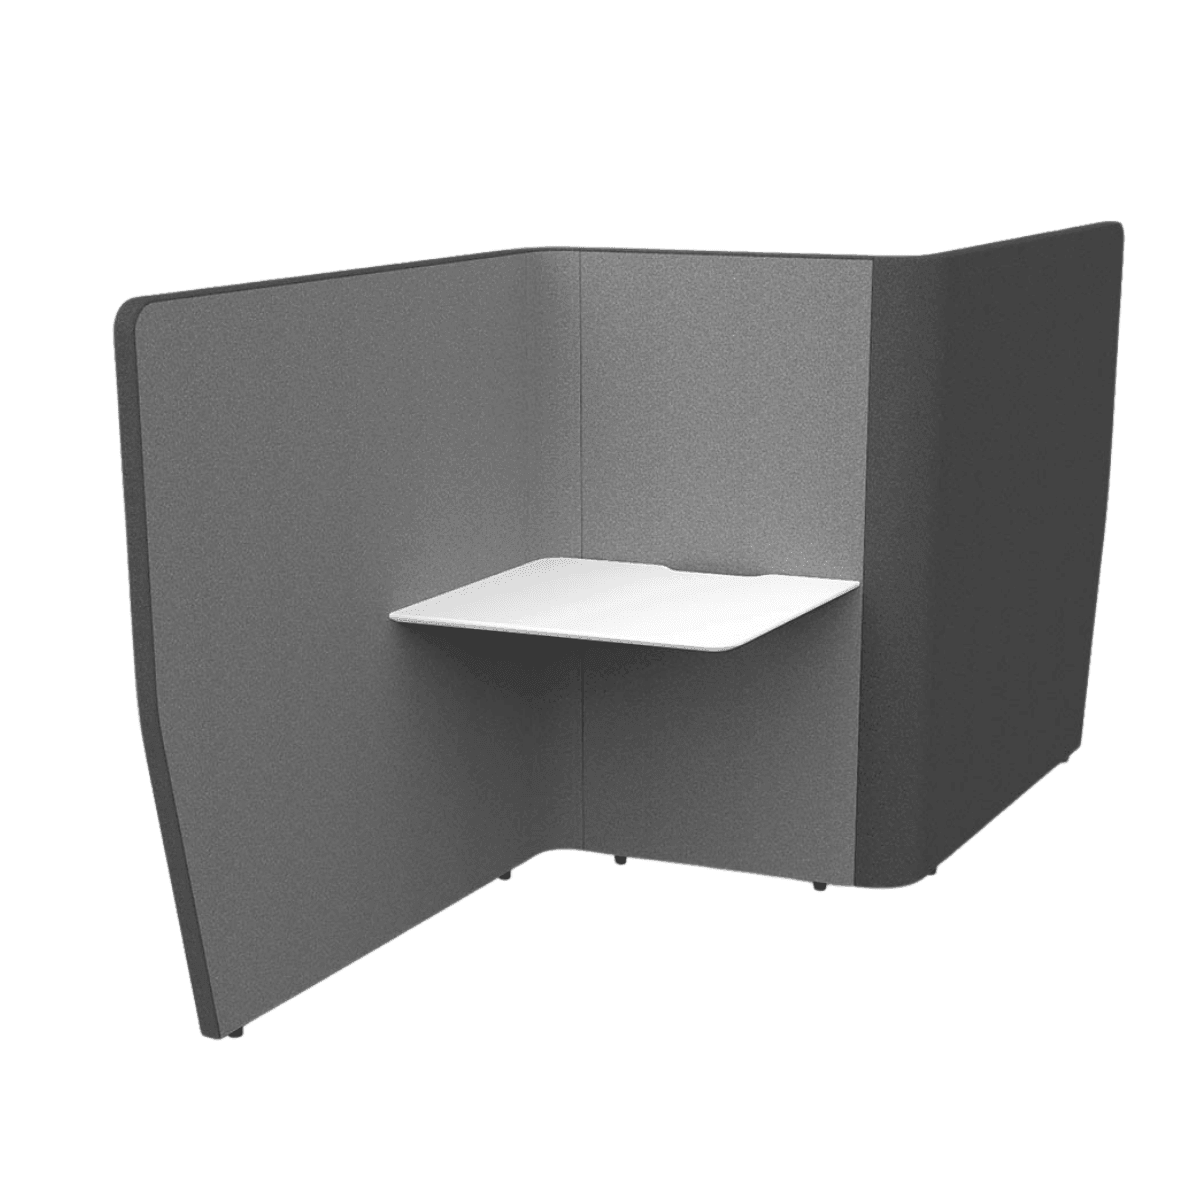 Motion Wave Work Pods - Office Furniture Company 